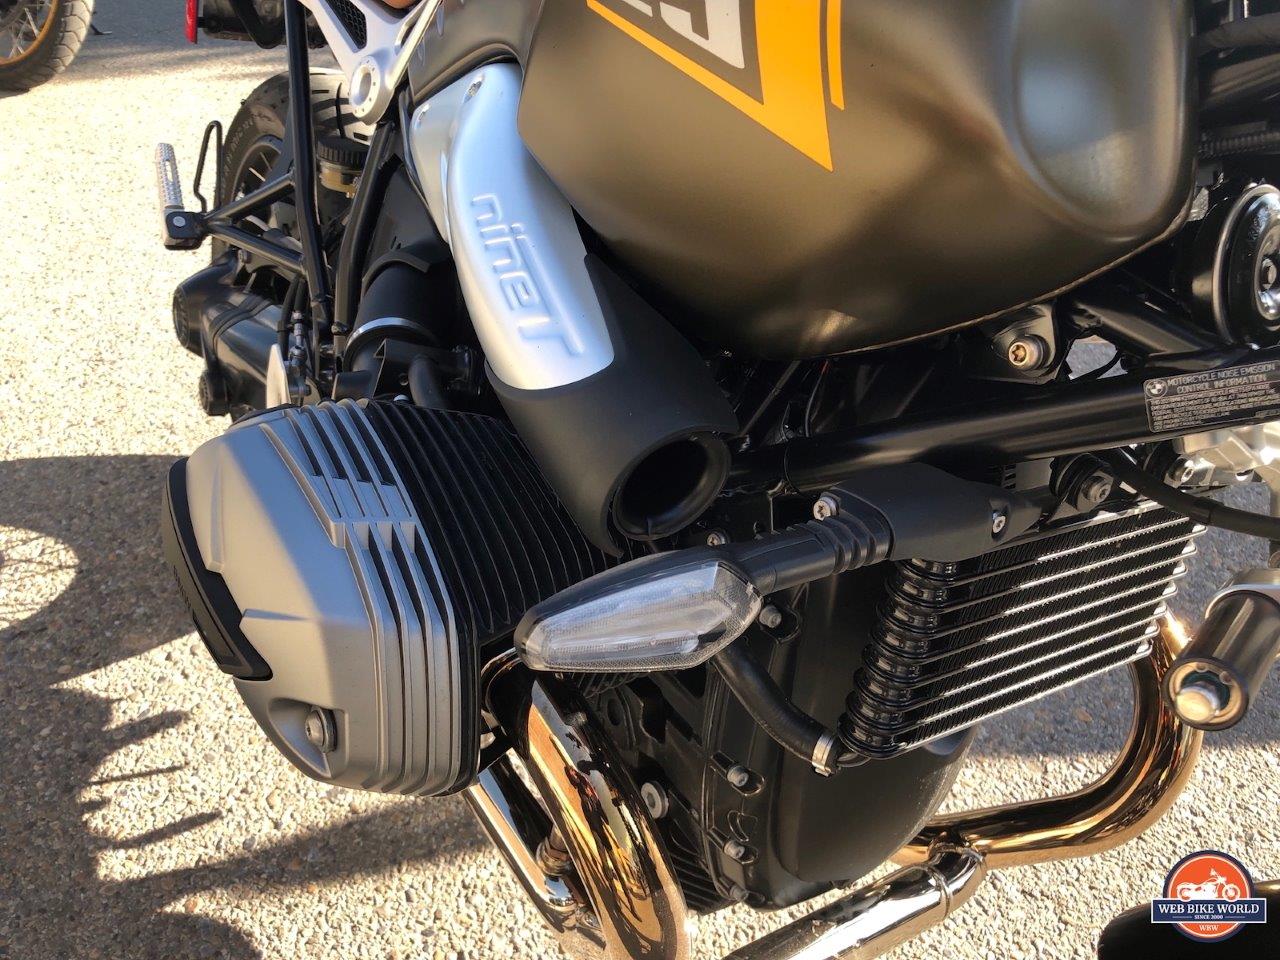 A close-up of the chassis and guts fo the new 2021 BMW R NineT Scrambler prior to the demo ride